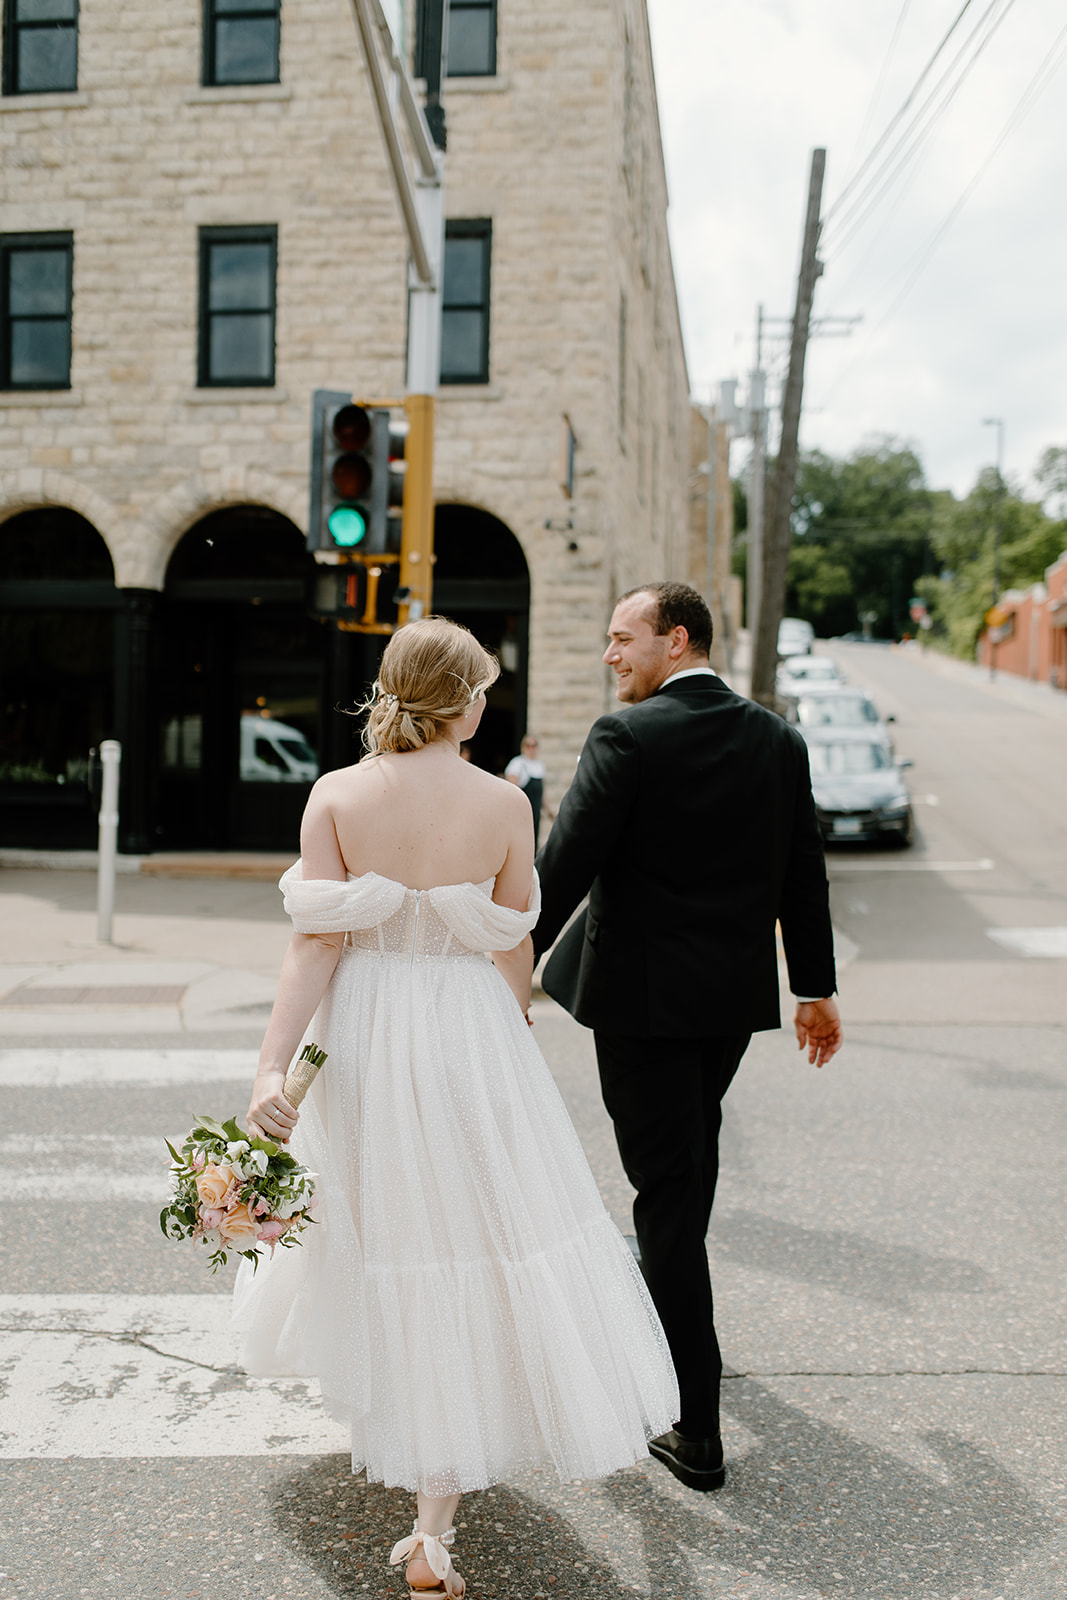 Bride and groom hold hands and walk across the street